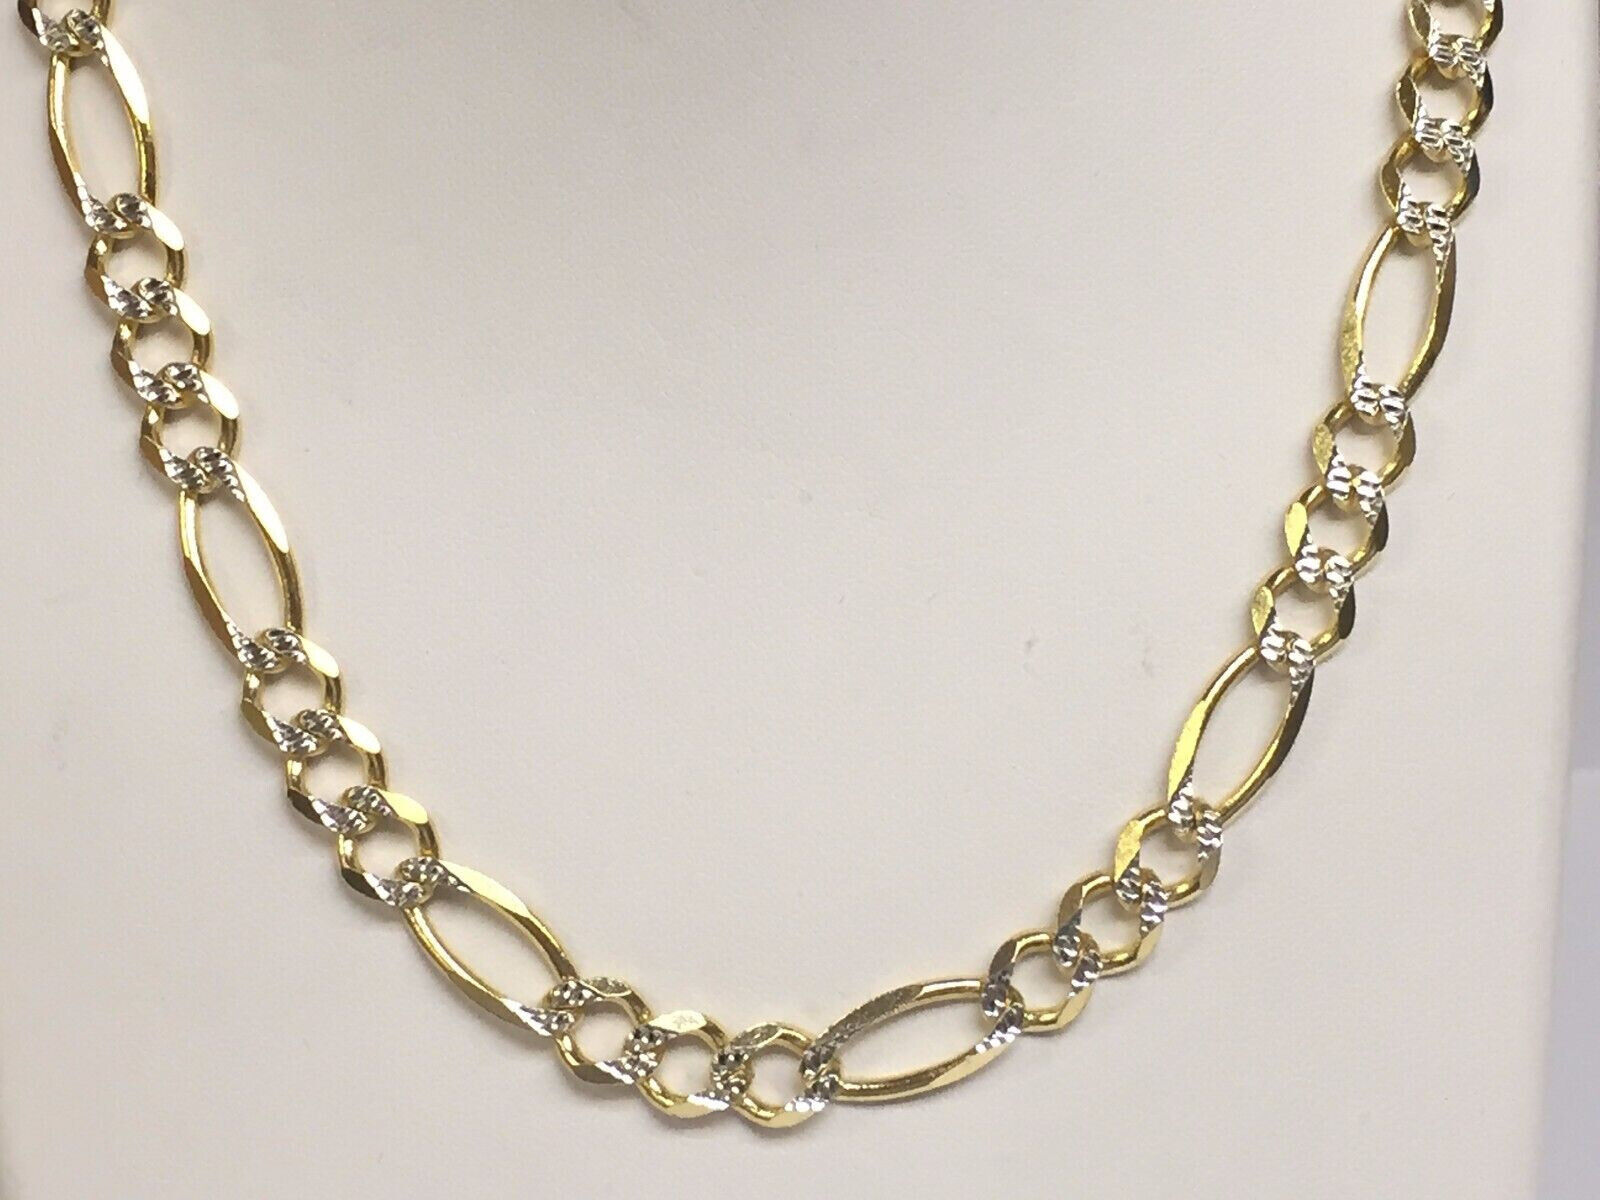 Pre-owned R C I 14k Solid Gold Pave Figaro Link Men's Chain/necklace 24" 7.5 Mm 42 Grams In Yellow